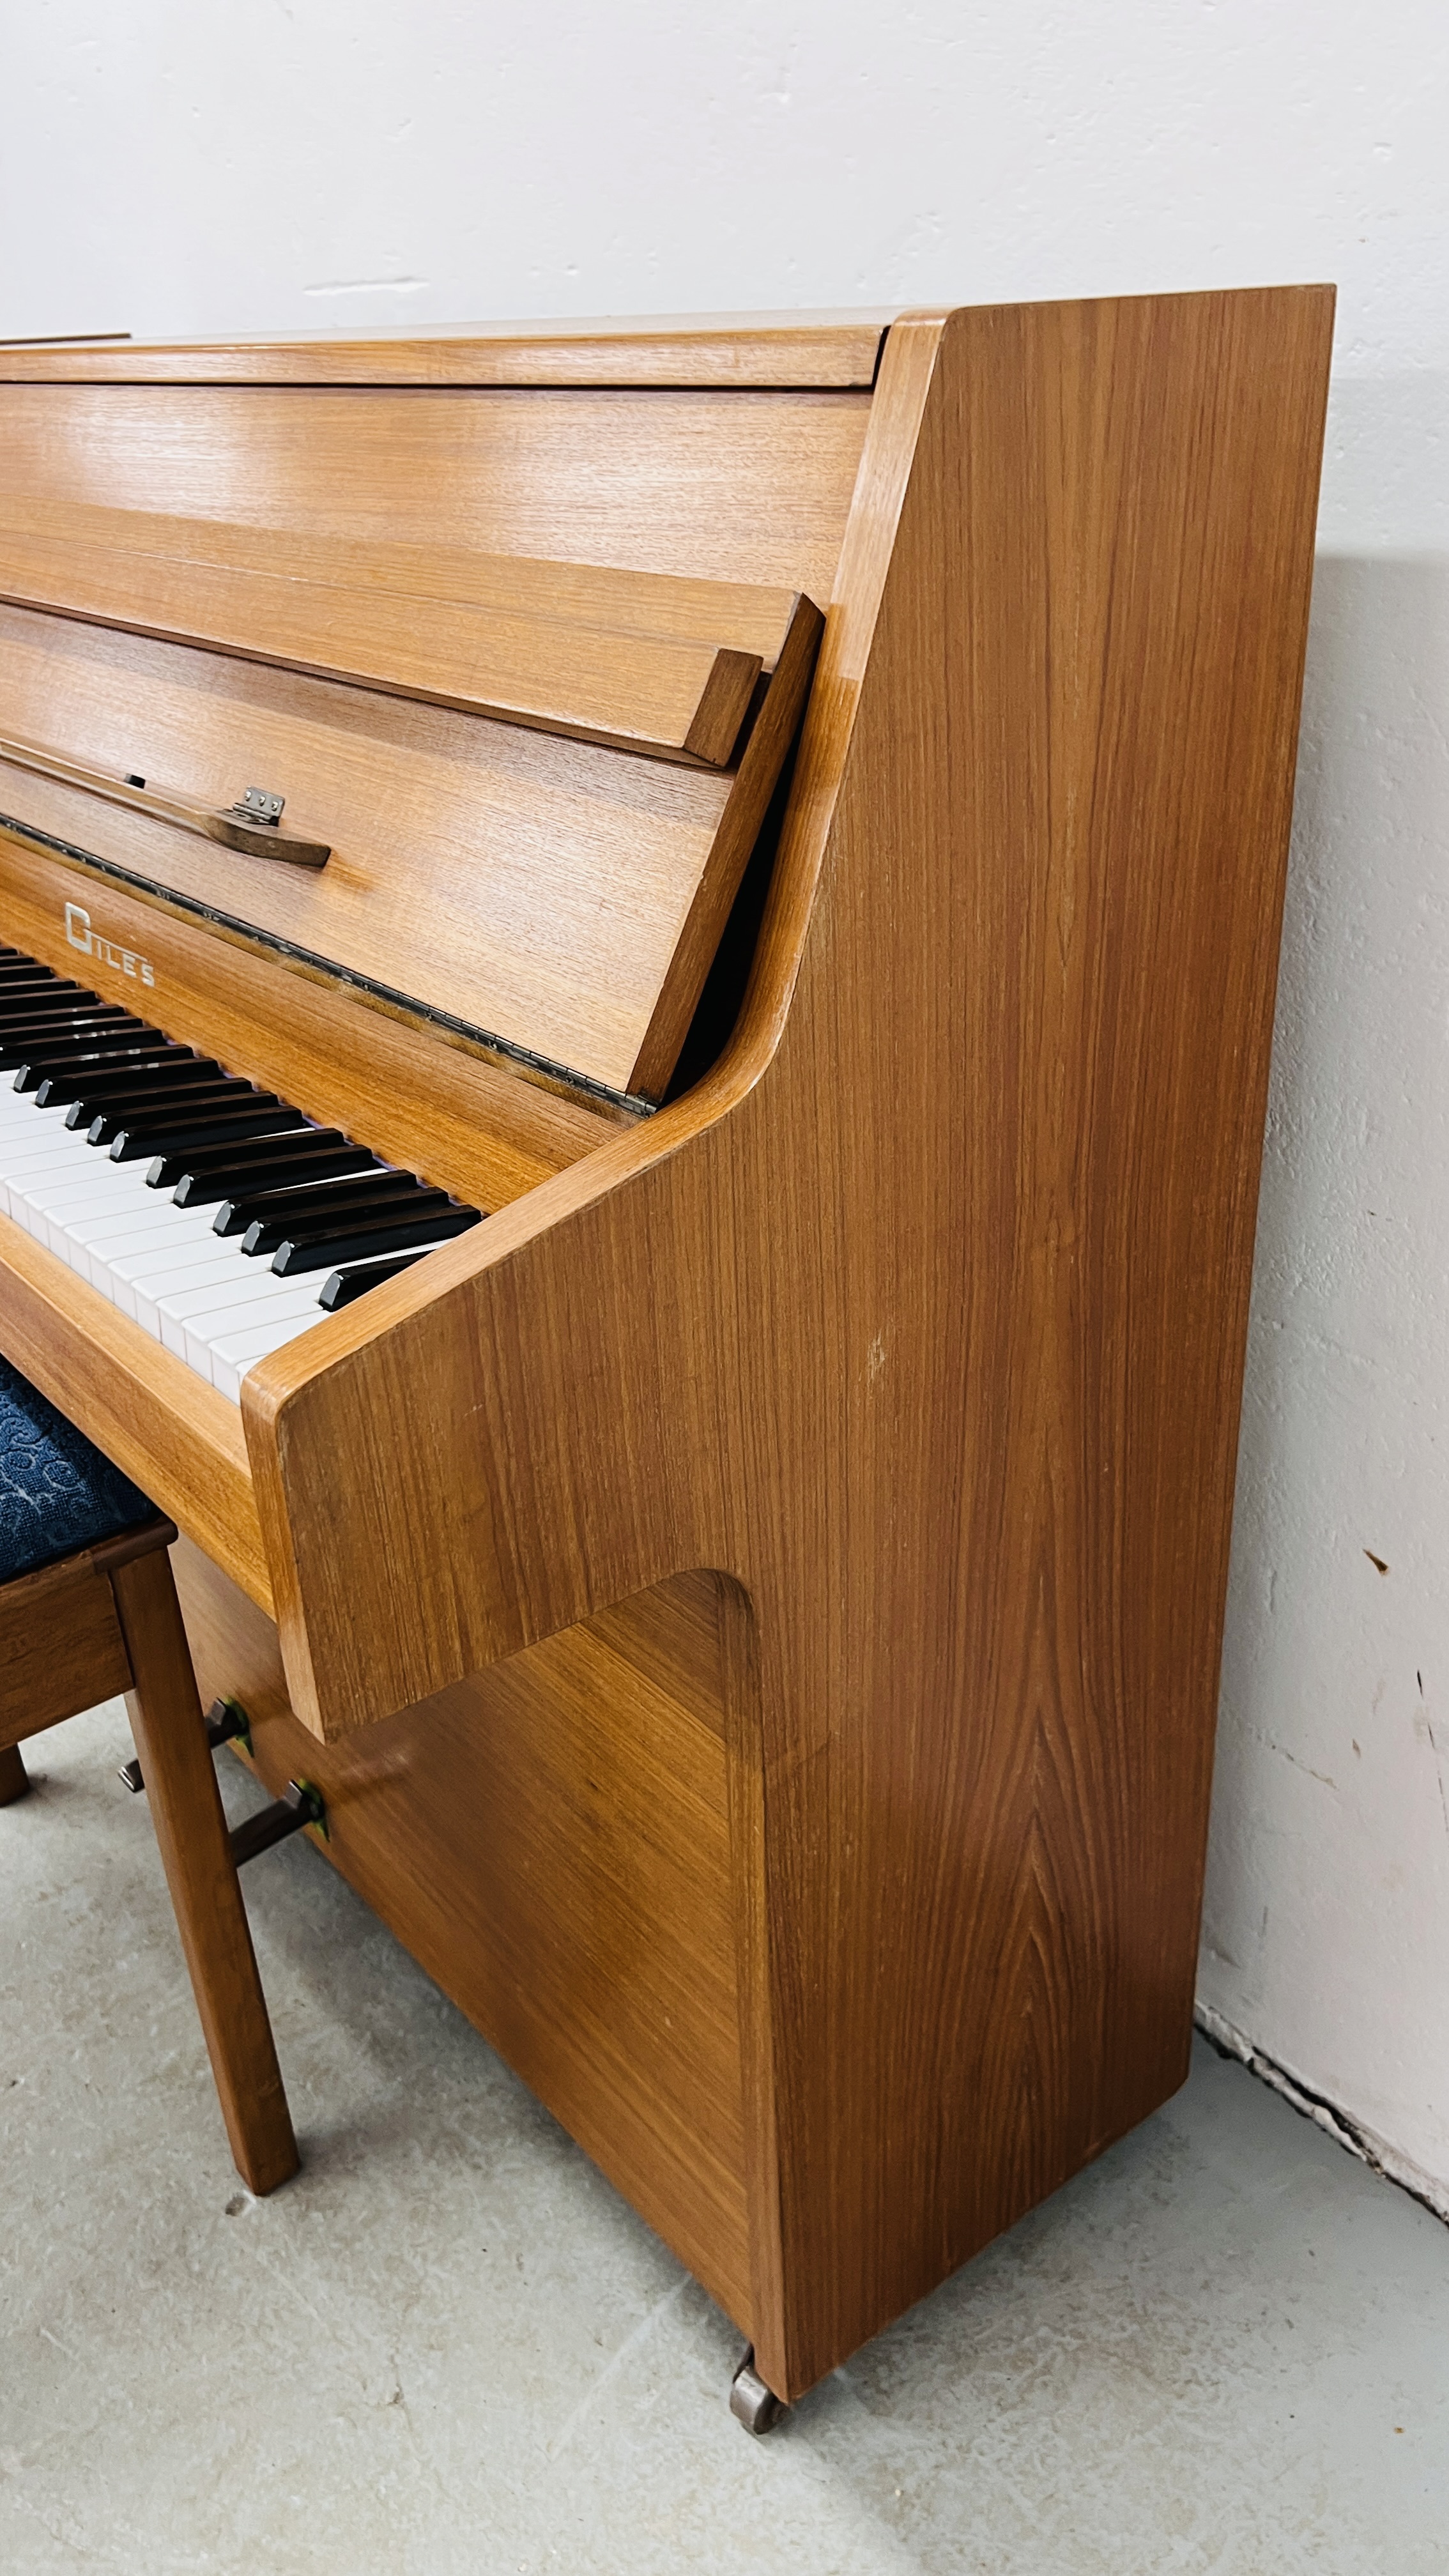 A GILES MODERN OVERSTRUNG UPRIGHT PIANO COMPLETE WITH MUSIC STOOL - Image 7 of 13